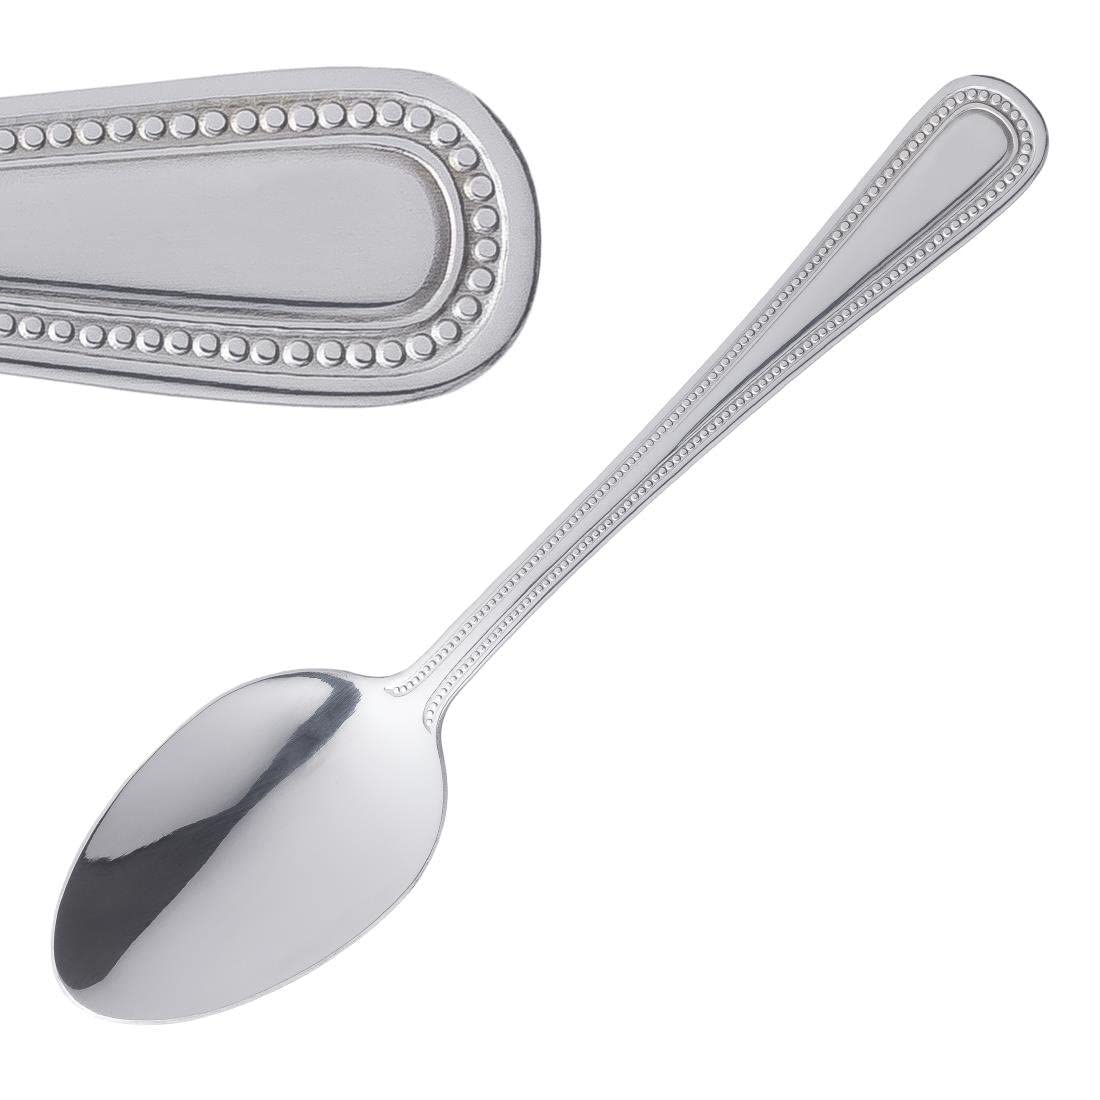 Olympia Bead Dessert Spoon Stainless Steel 185mm C129 Pack Quantity 12 RRP £12.68 CLEARANCE XL £9.99